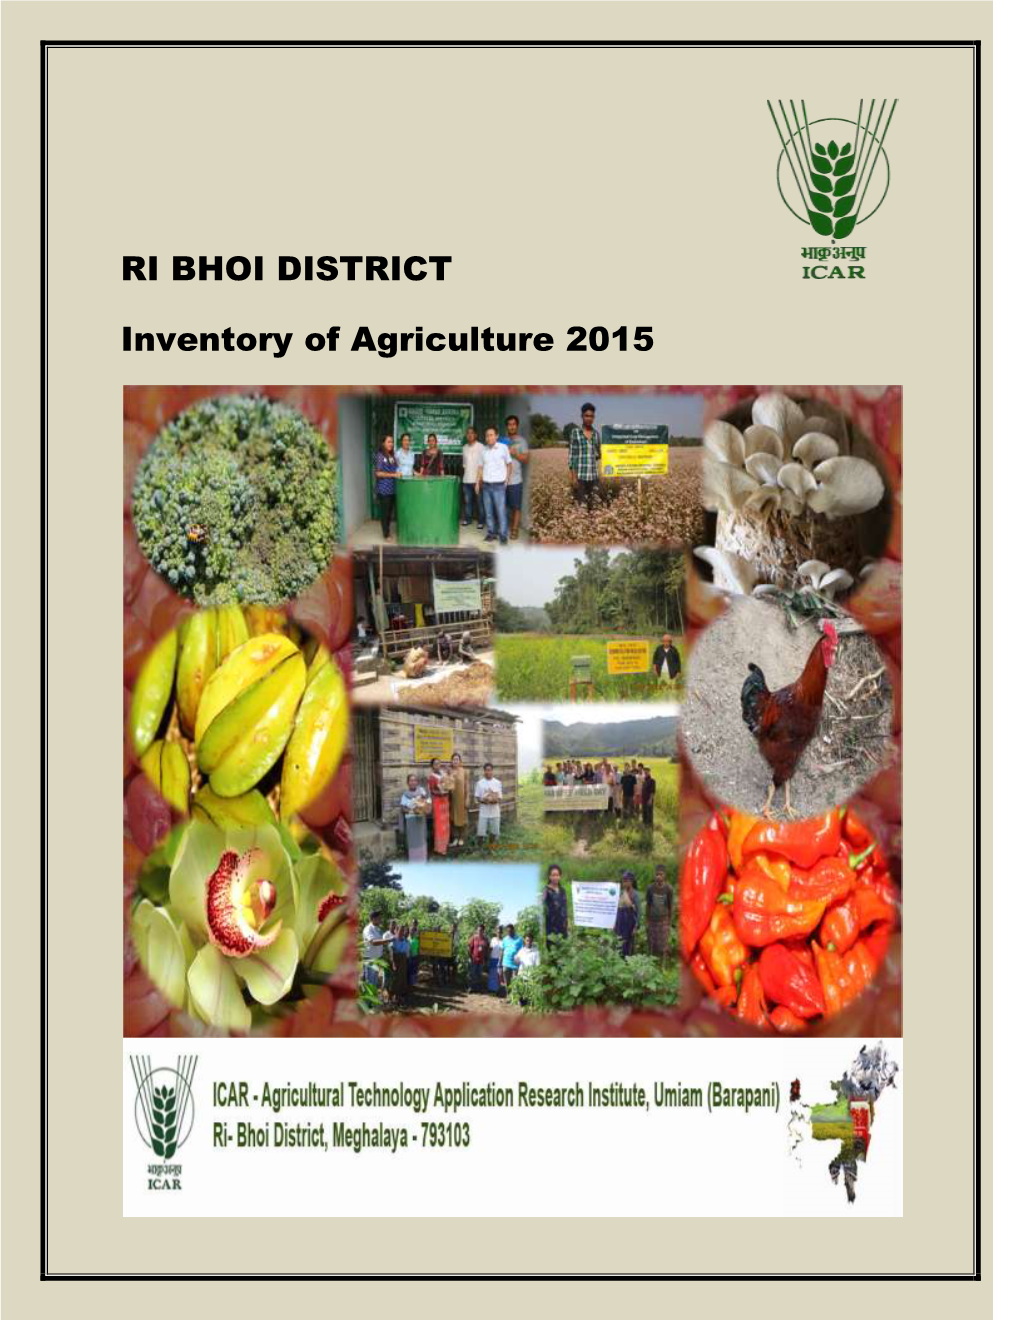 RI BHOI DISTRICT Inventory of Agriculture 2015